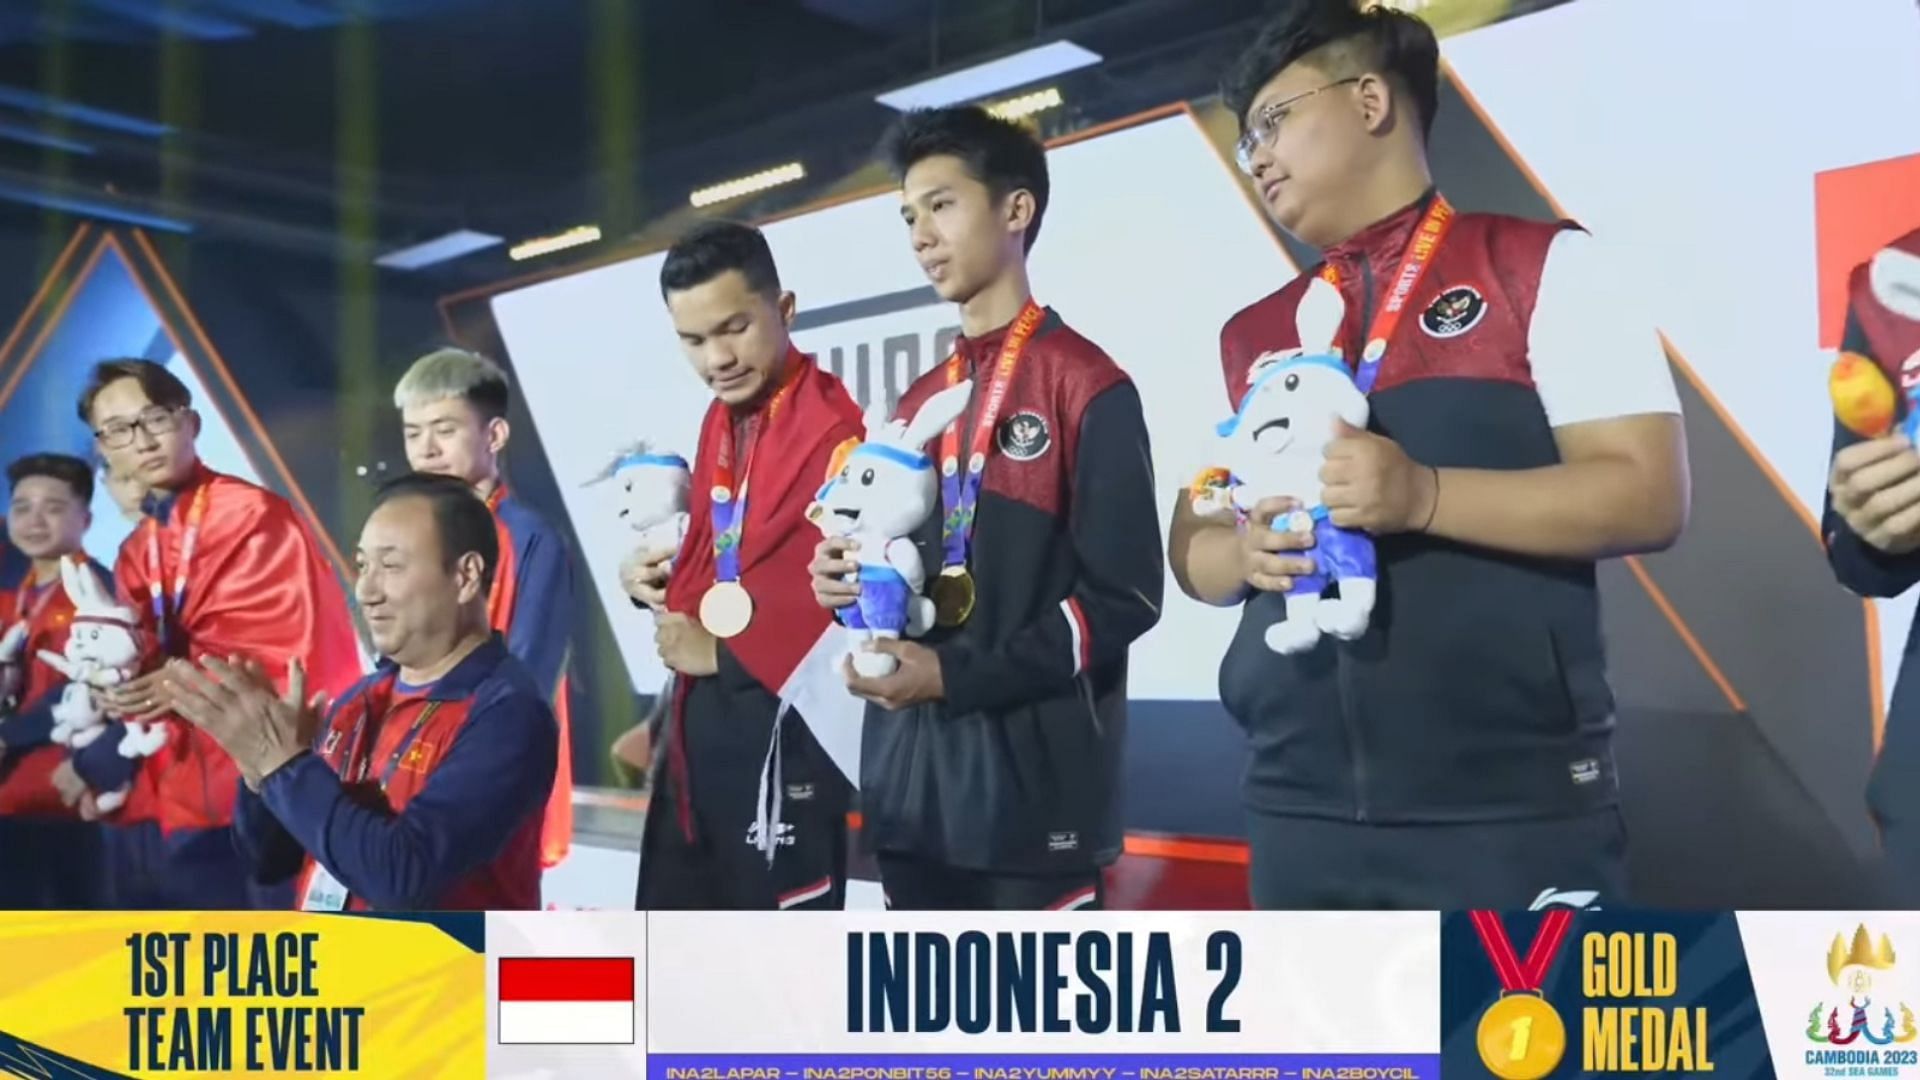 Indonesia wins gold medal at 32nd SEA Games Cambodia (Image via PUBG Mobile)